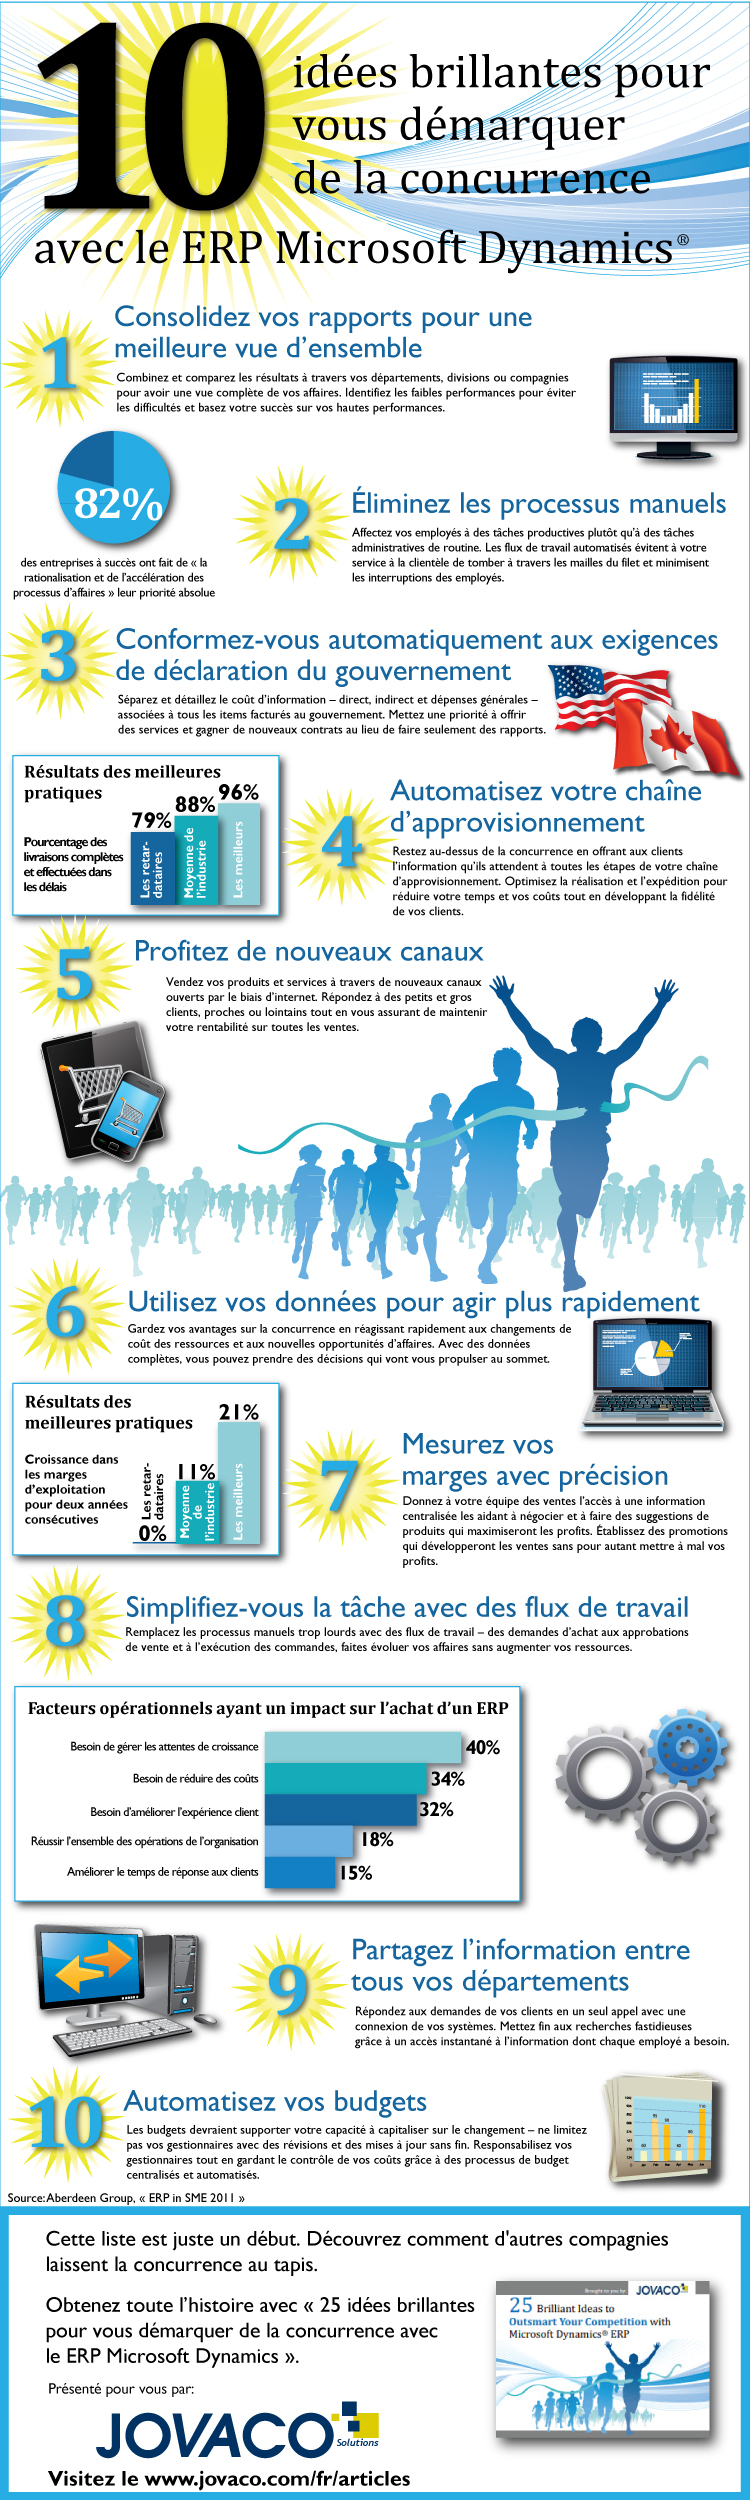 20130117-infographique-concurrence-gp